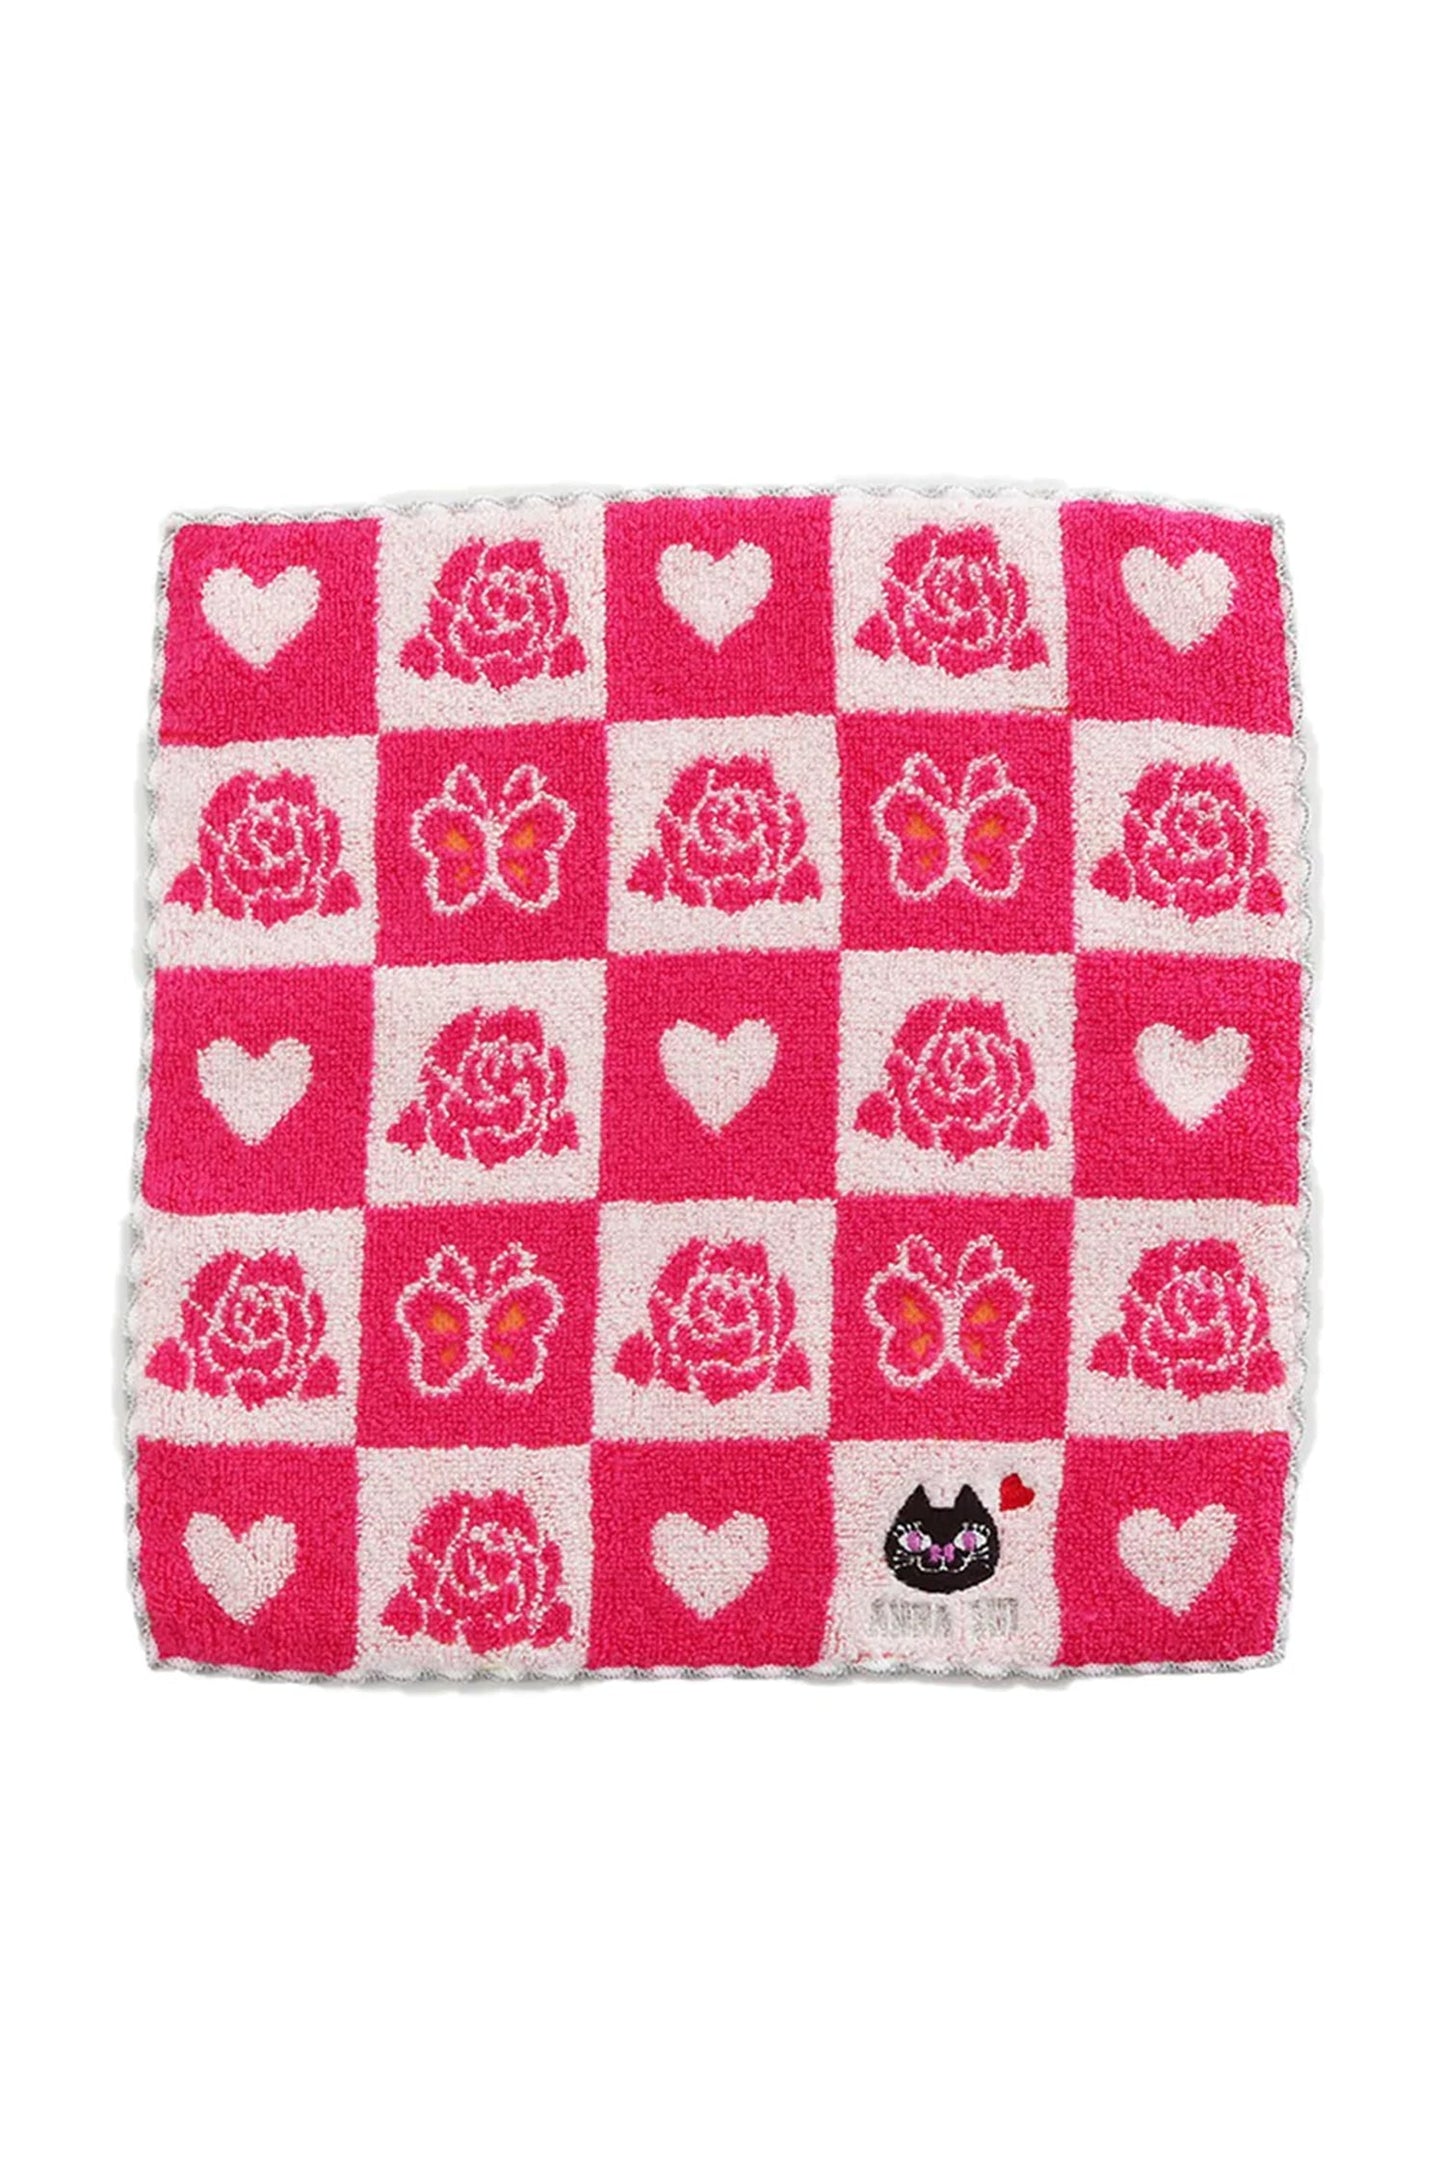 Washcloth, red/white checkerboard, white heart, red roses, red/white butterflies, black, Anna Sui